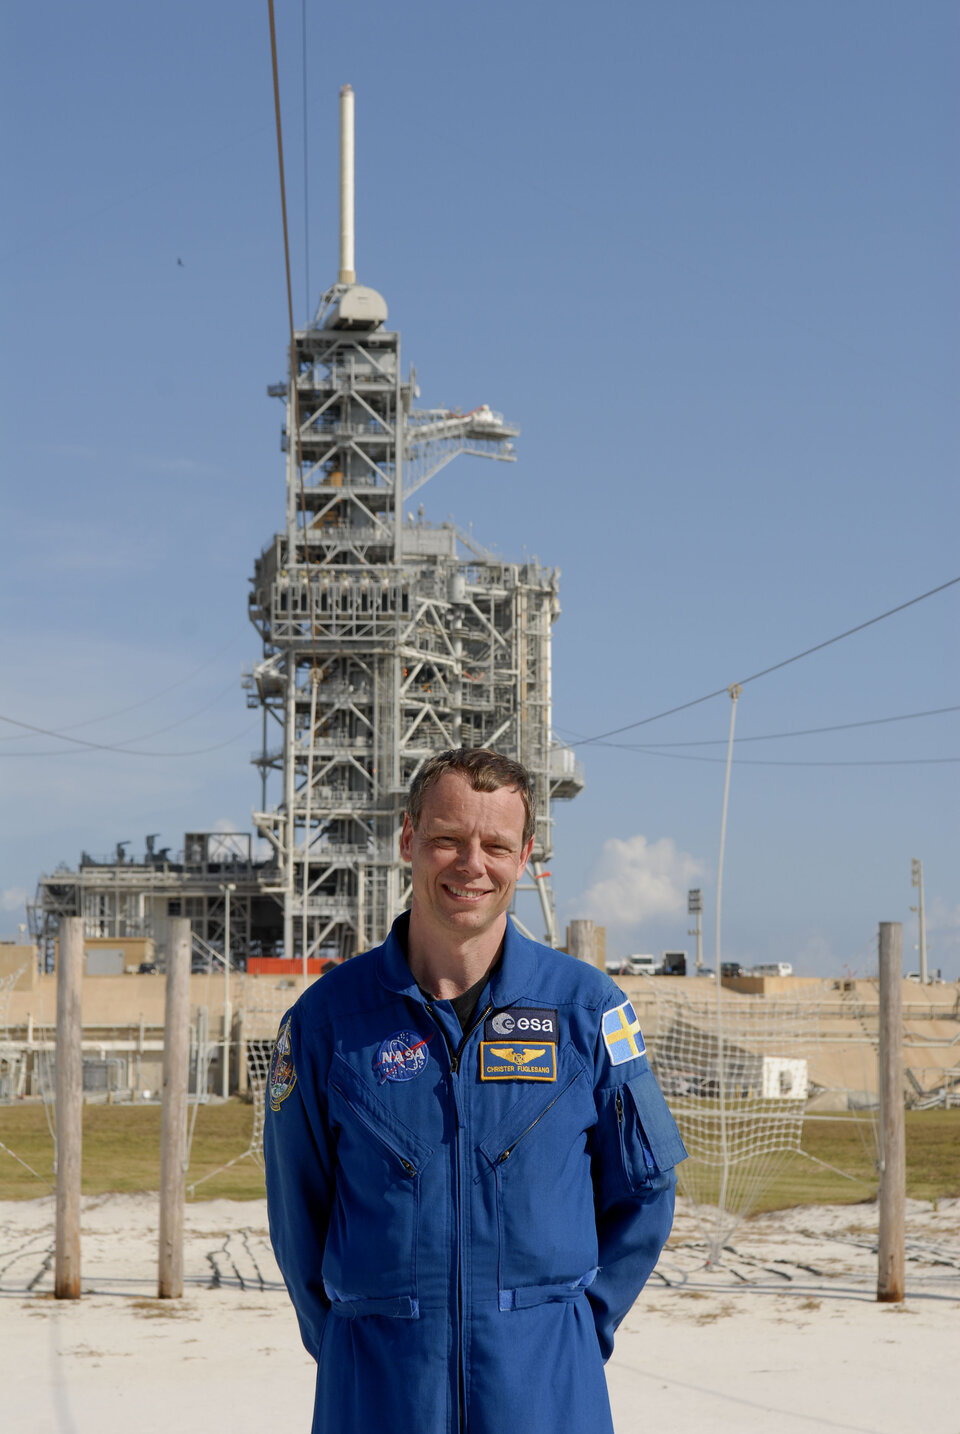 ESA astronaut Christer Fuglesang is near the launch pad area at NASA's Kennedy Space Center